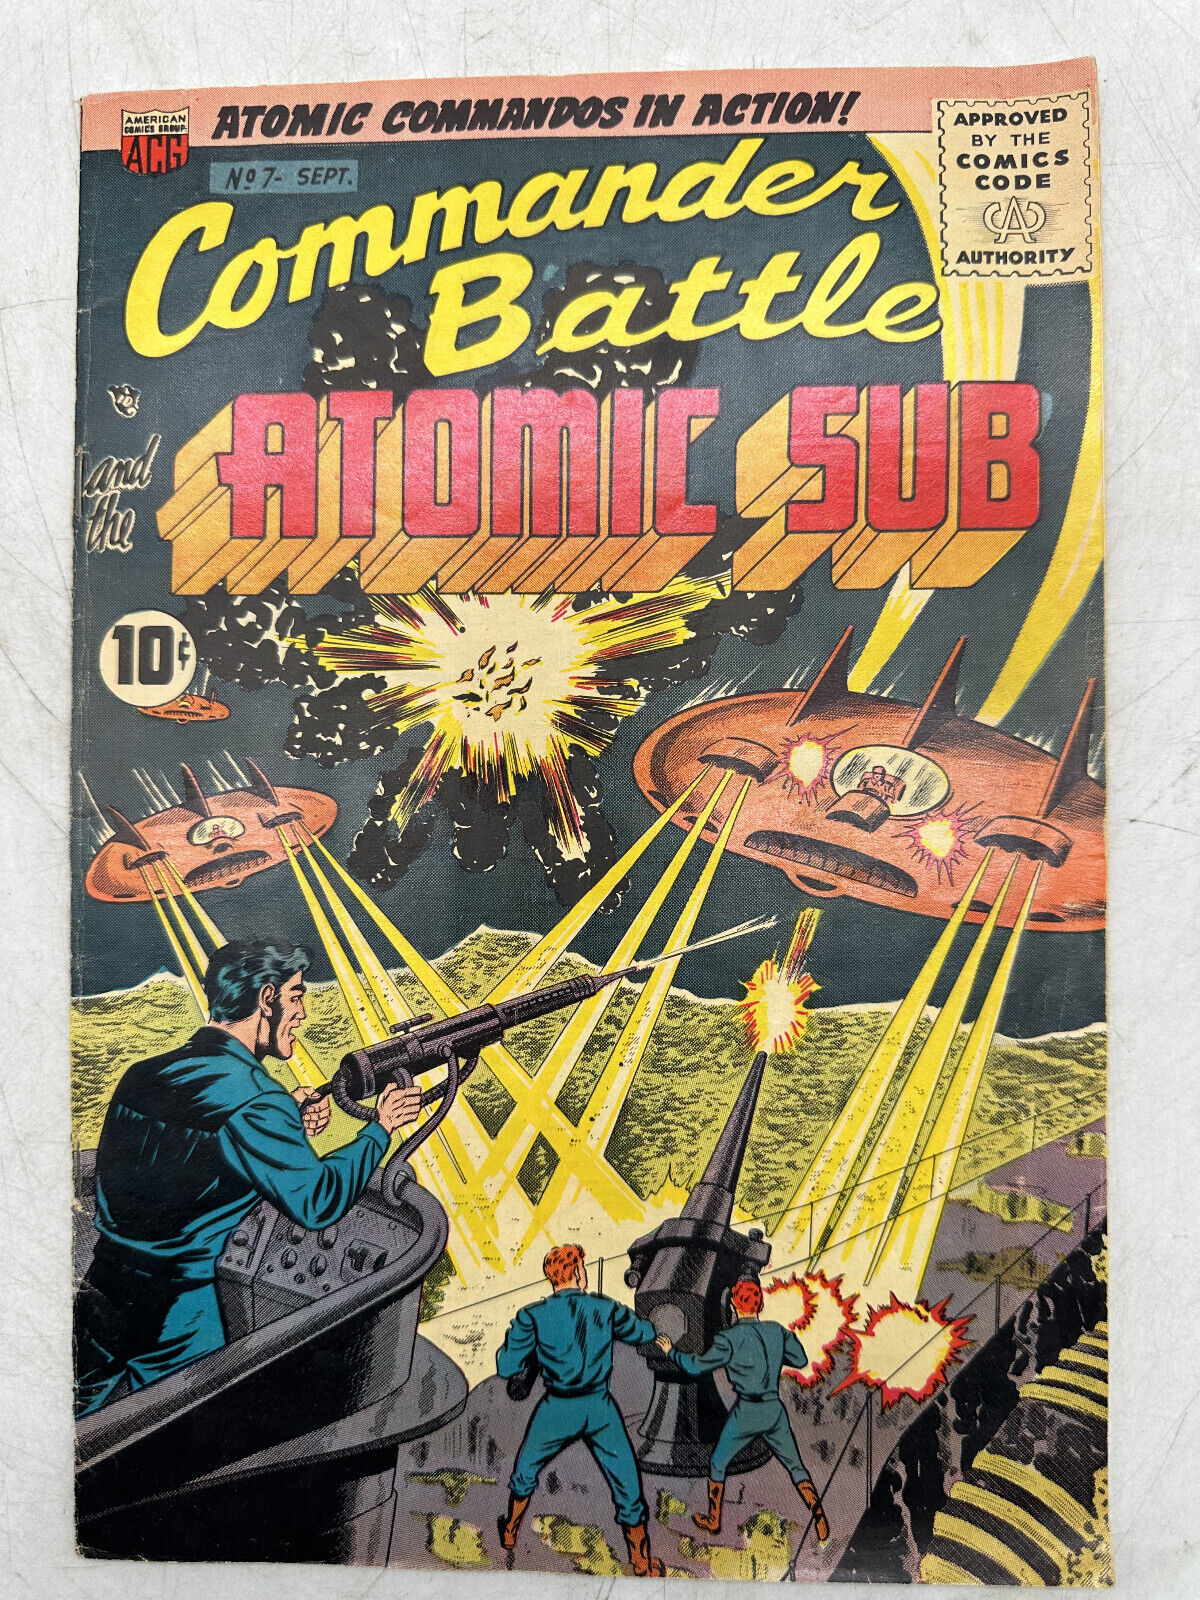 Commander Battle and the Atomic Sub #7 American Comics Group 1954 VG+